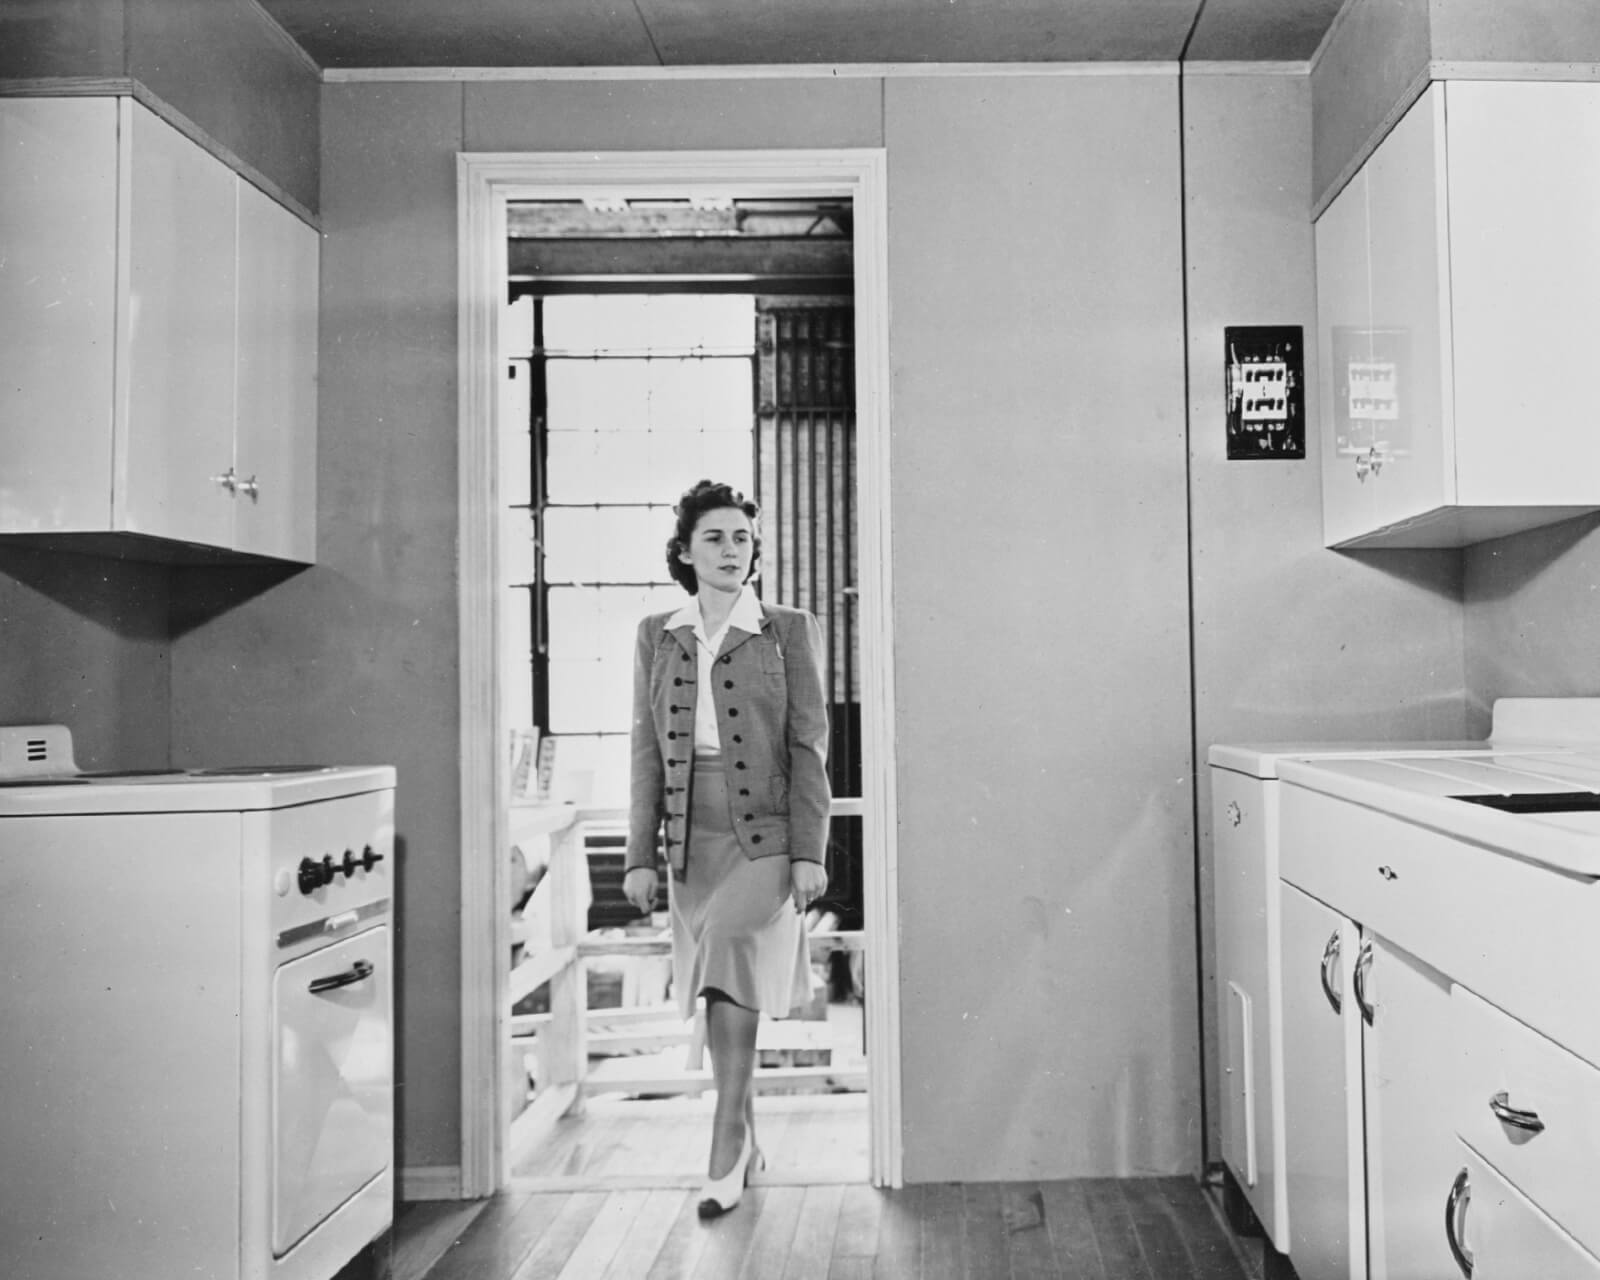 Kitchen in defense workers housing, 1941. Photo via Library of Congress